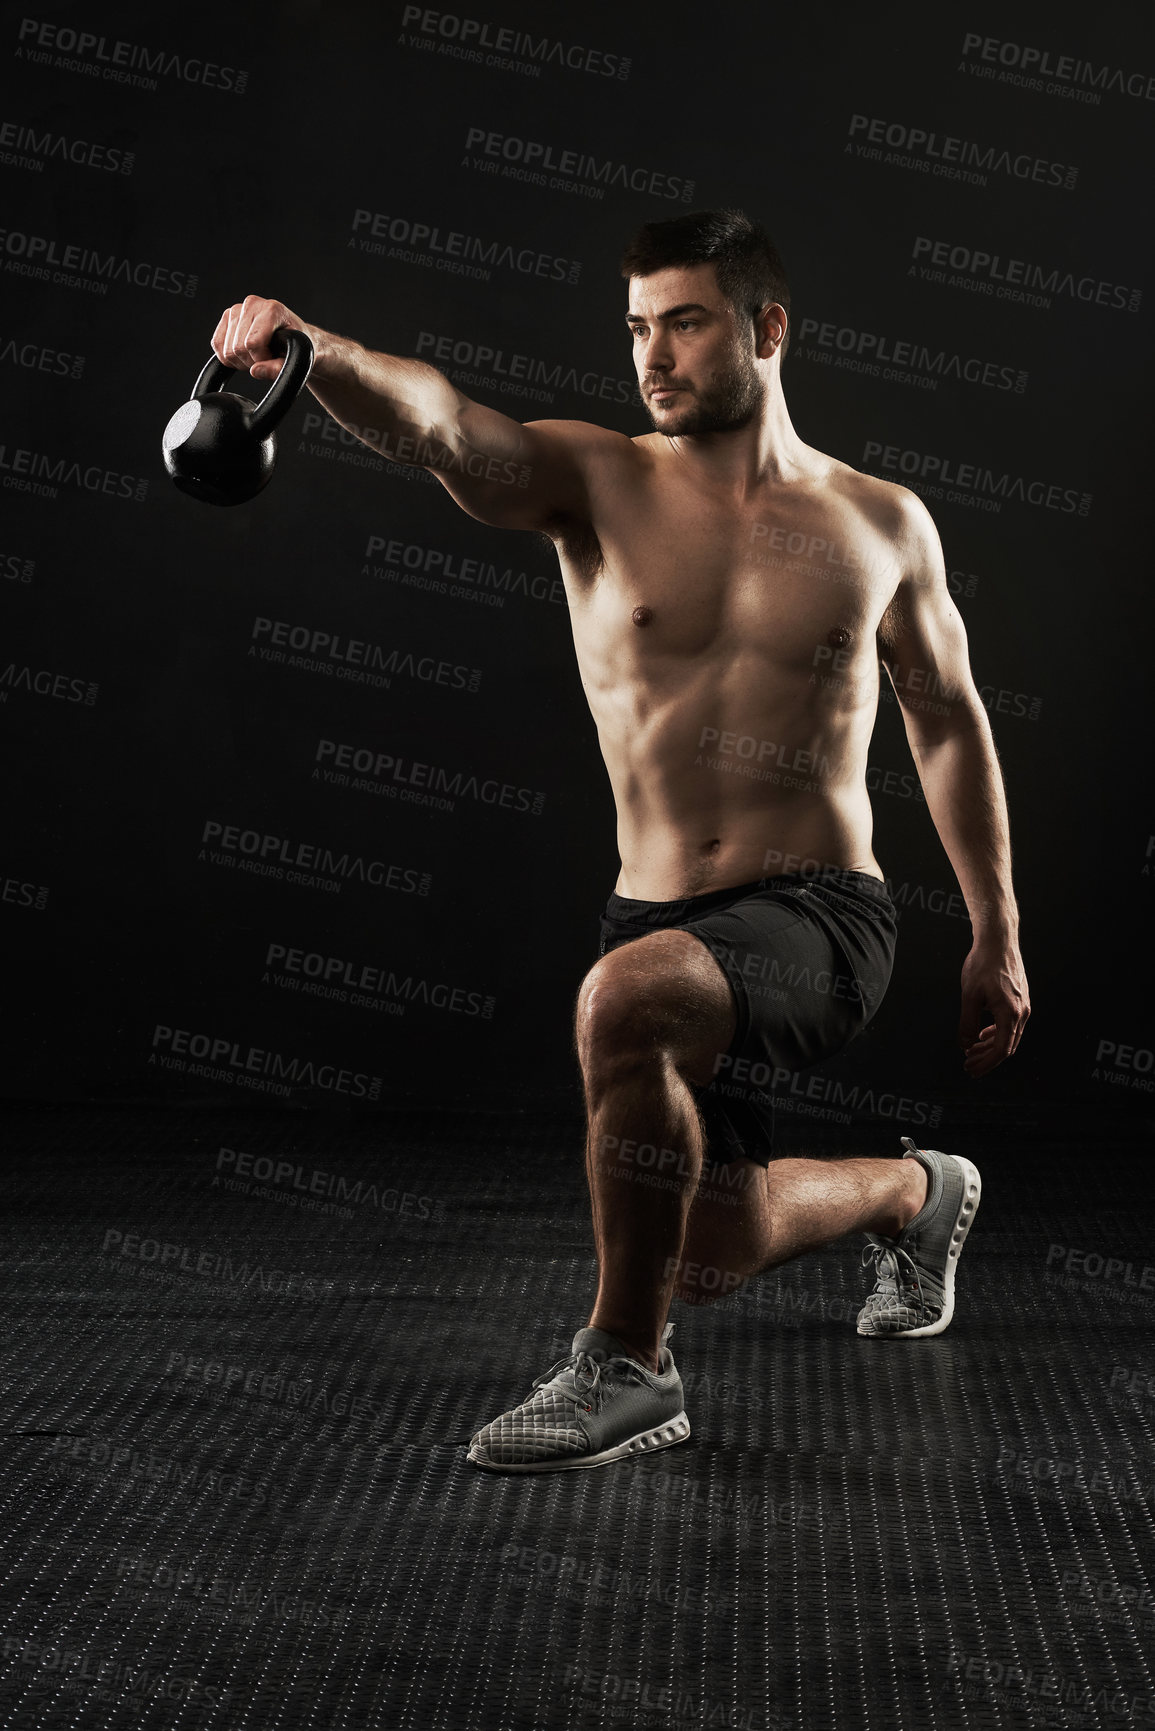 Buy stock photo Studio shot of a sporty young man working out with a kettle bell isolated on black